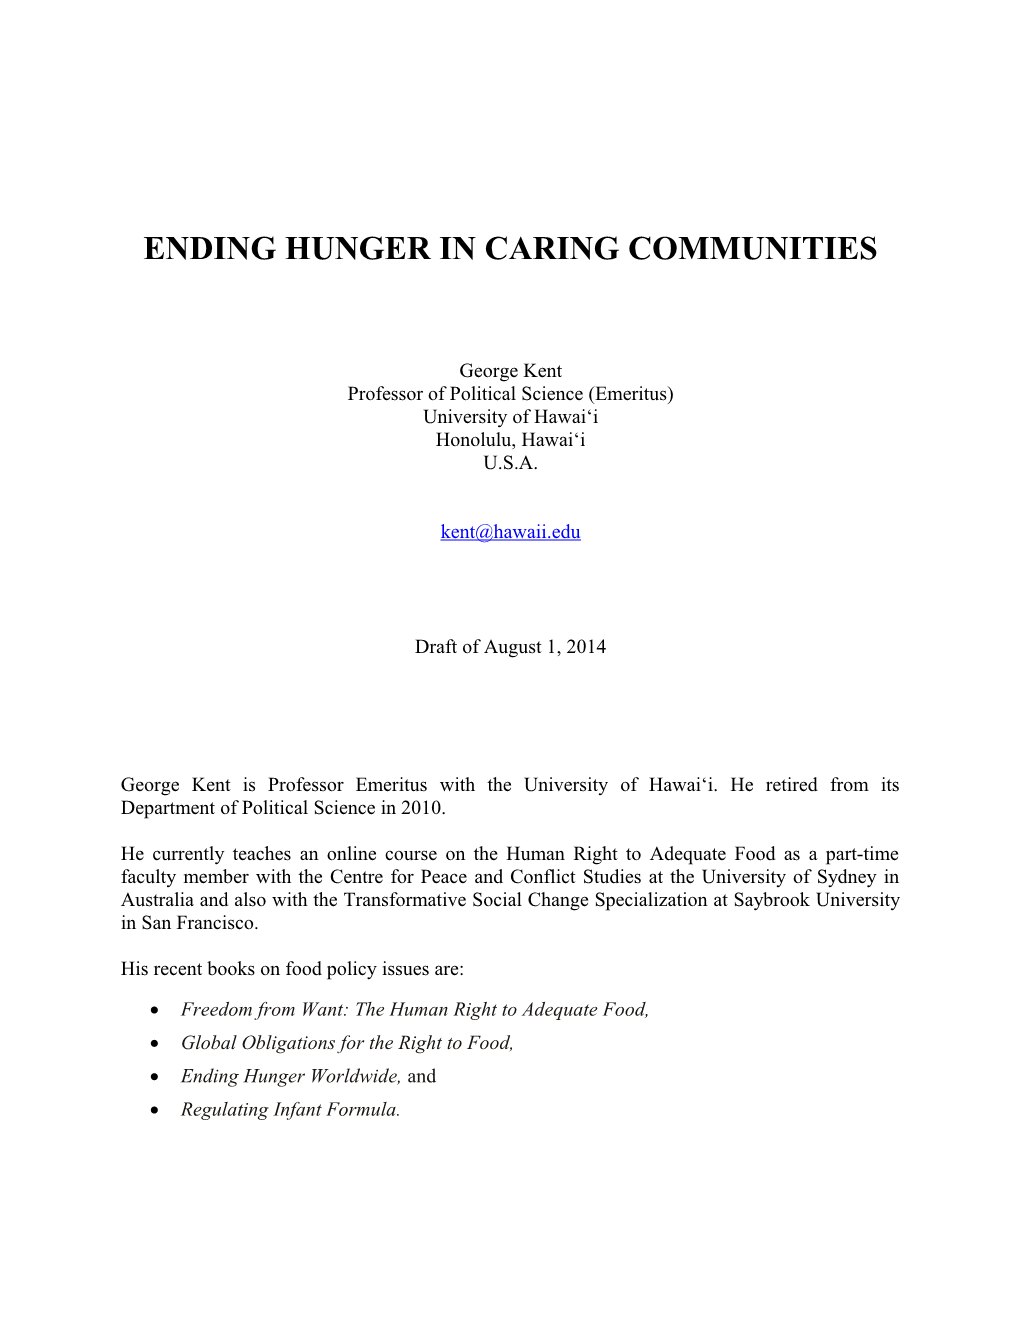 Ending Hunger in Caring Communities